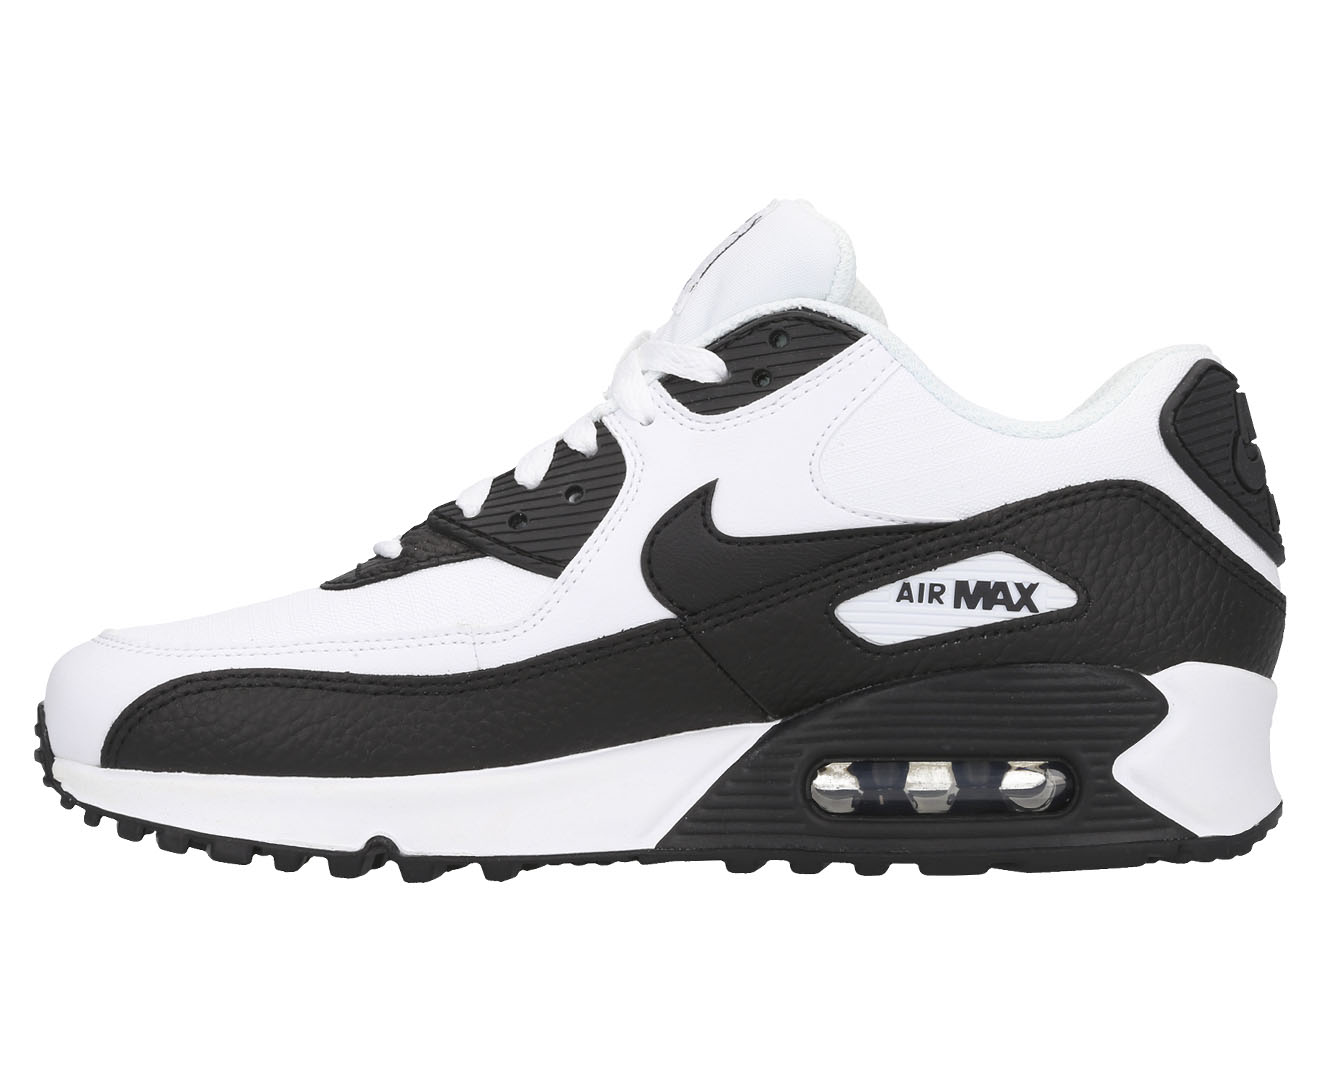 Nike Women's Air Max 90 Sneakers - White/Black | Catch.co.nz